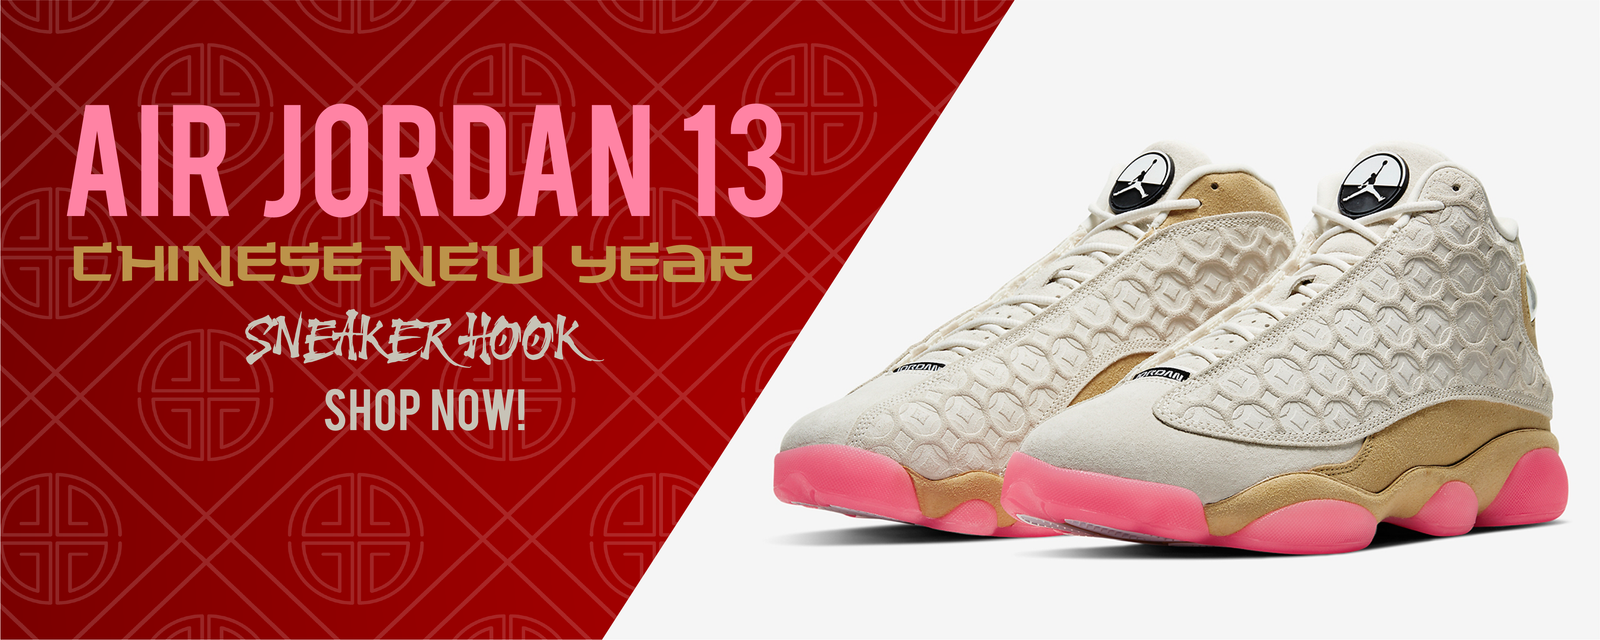 air jordan 13 chinese new year outfit